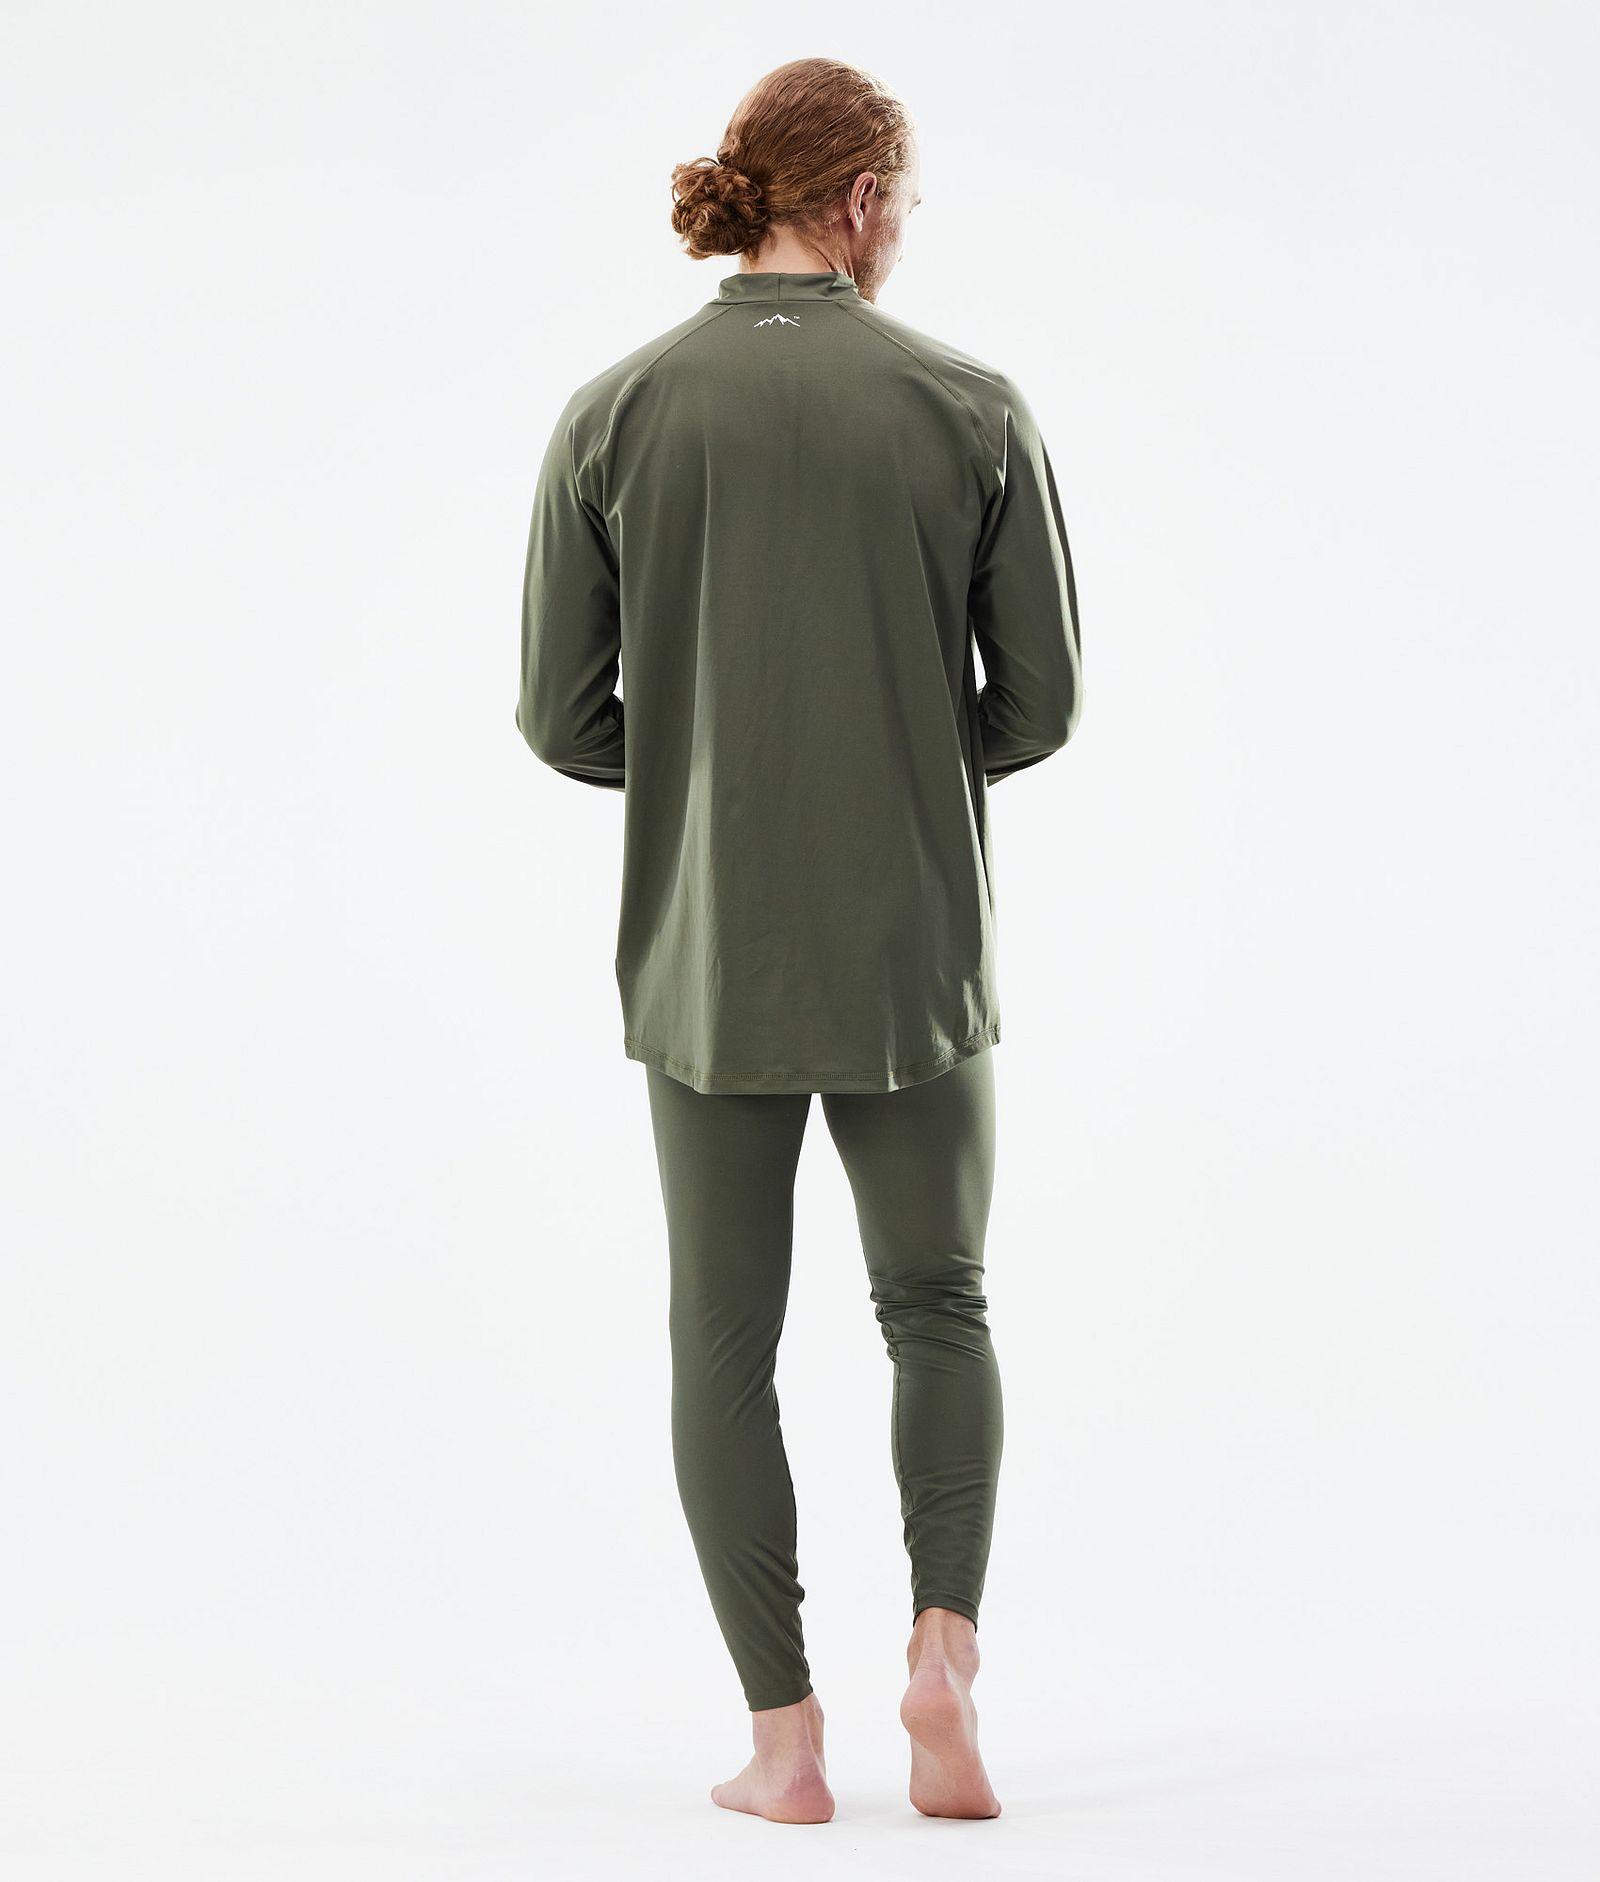 Dope Snuggle 2022 Base Layer Top Men 2X-Up Olive Green, Image 5 of 5